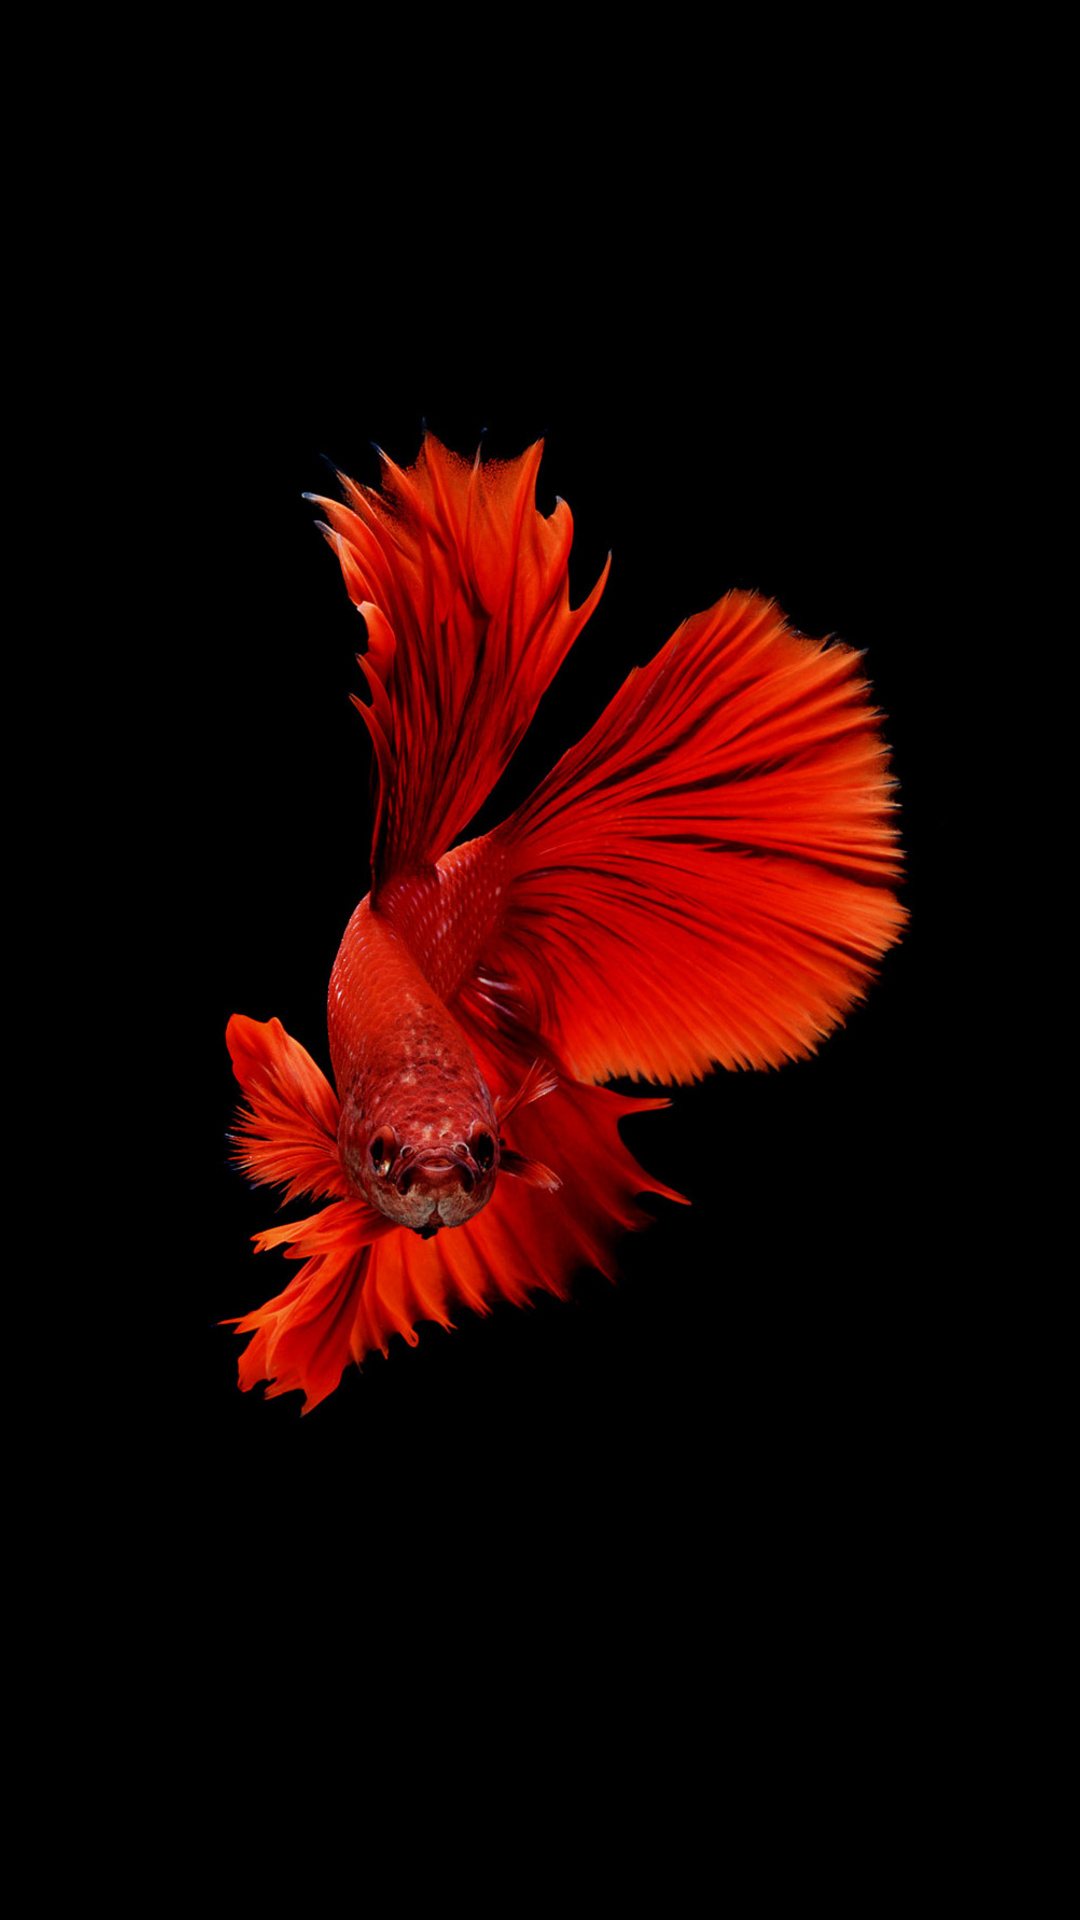 1080x19 Betta Fish Iphone 7 6s 6 Plus Pixel Xl One Plus 3 3t 5 Hd 4k Wallpapers Images 36 Phone Wallpaper